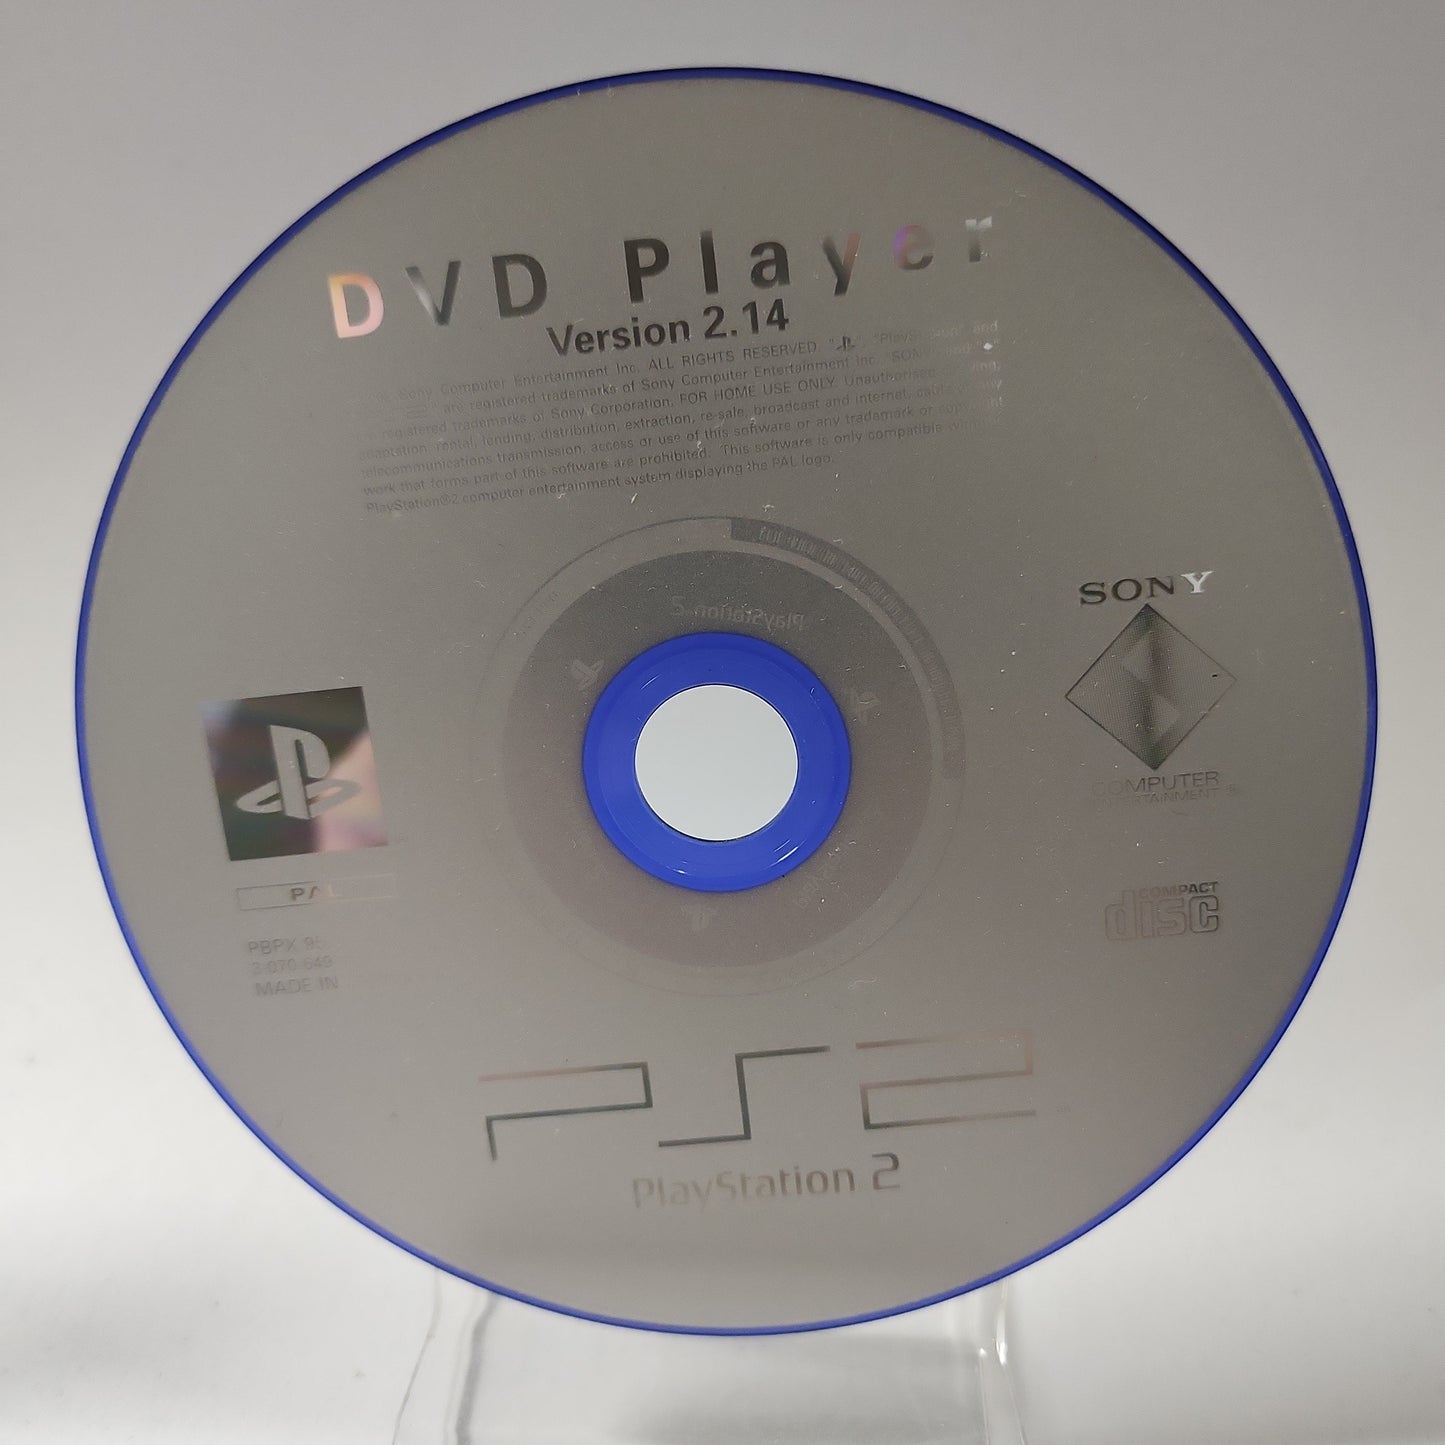 DVD-player Version 2.14 (Disc Only) PlayStation 2